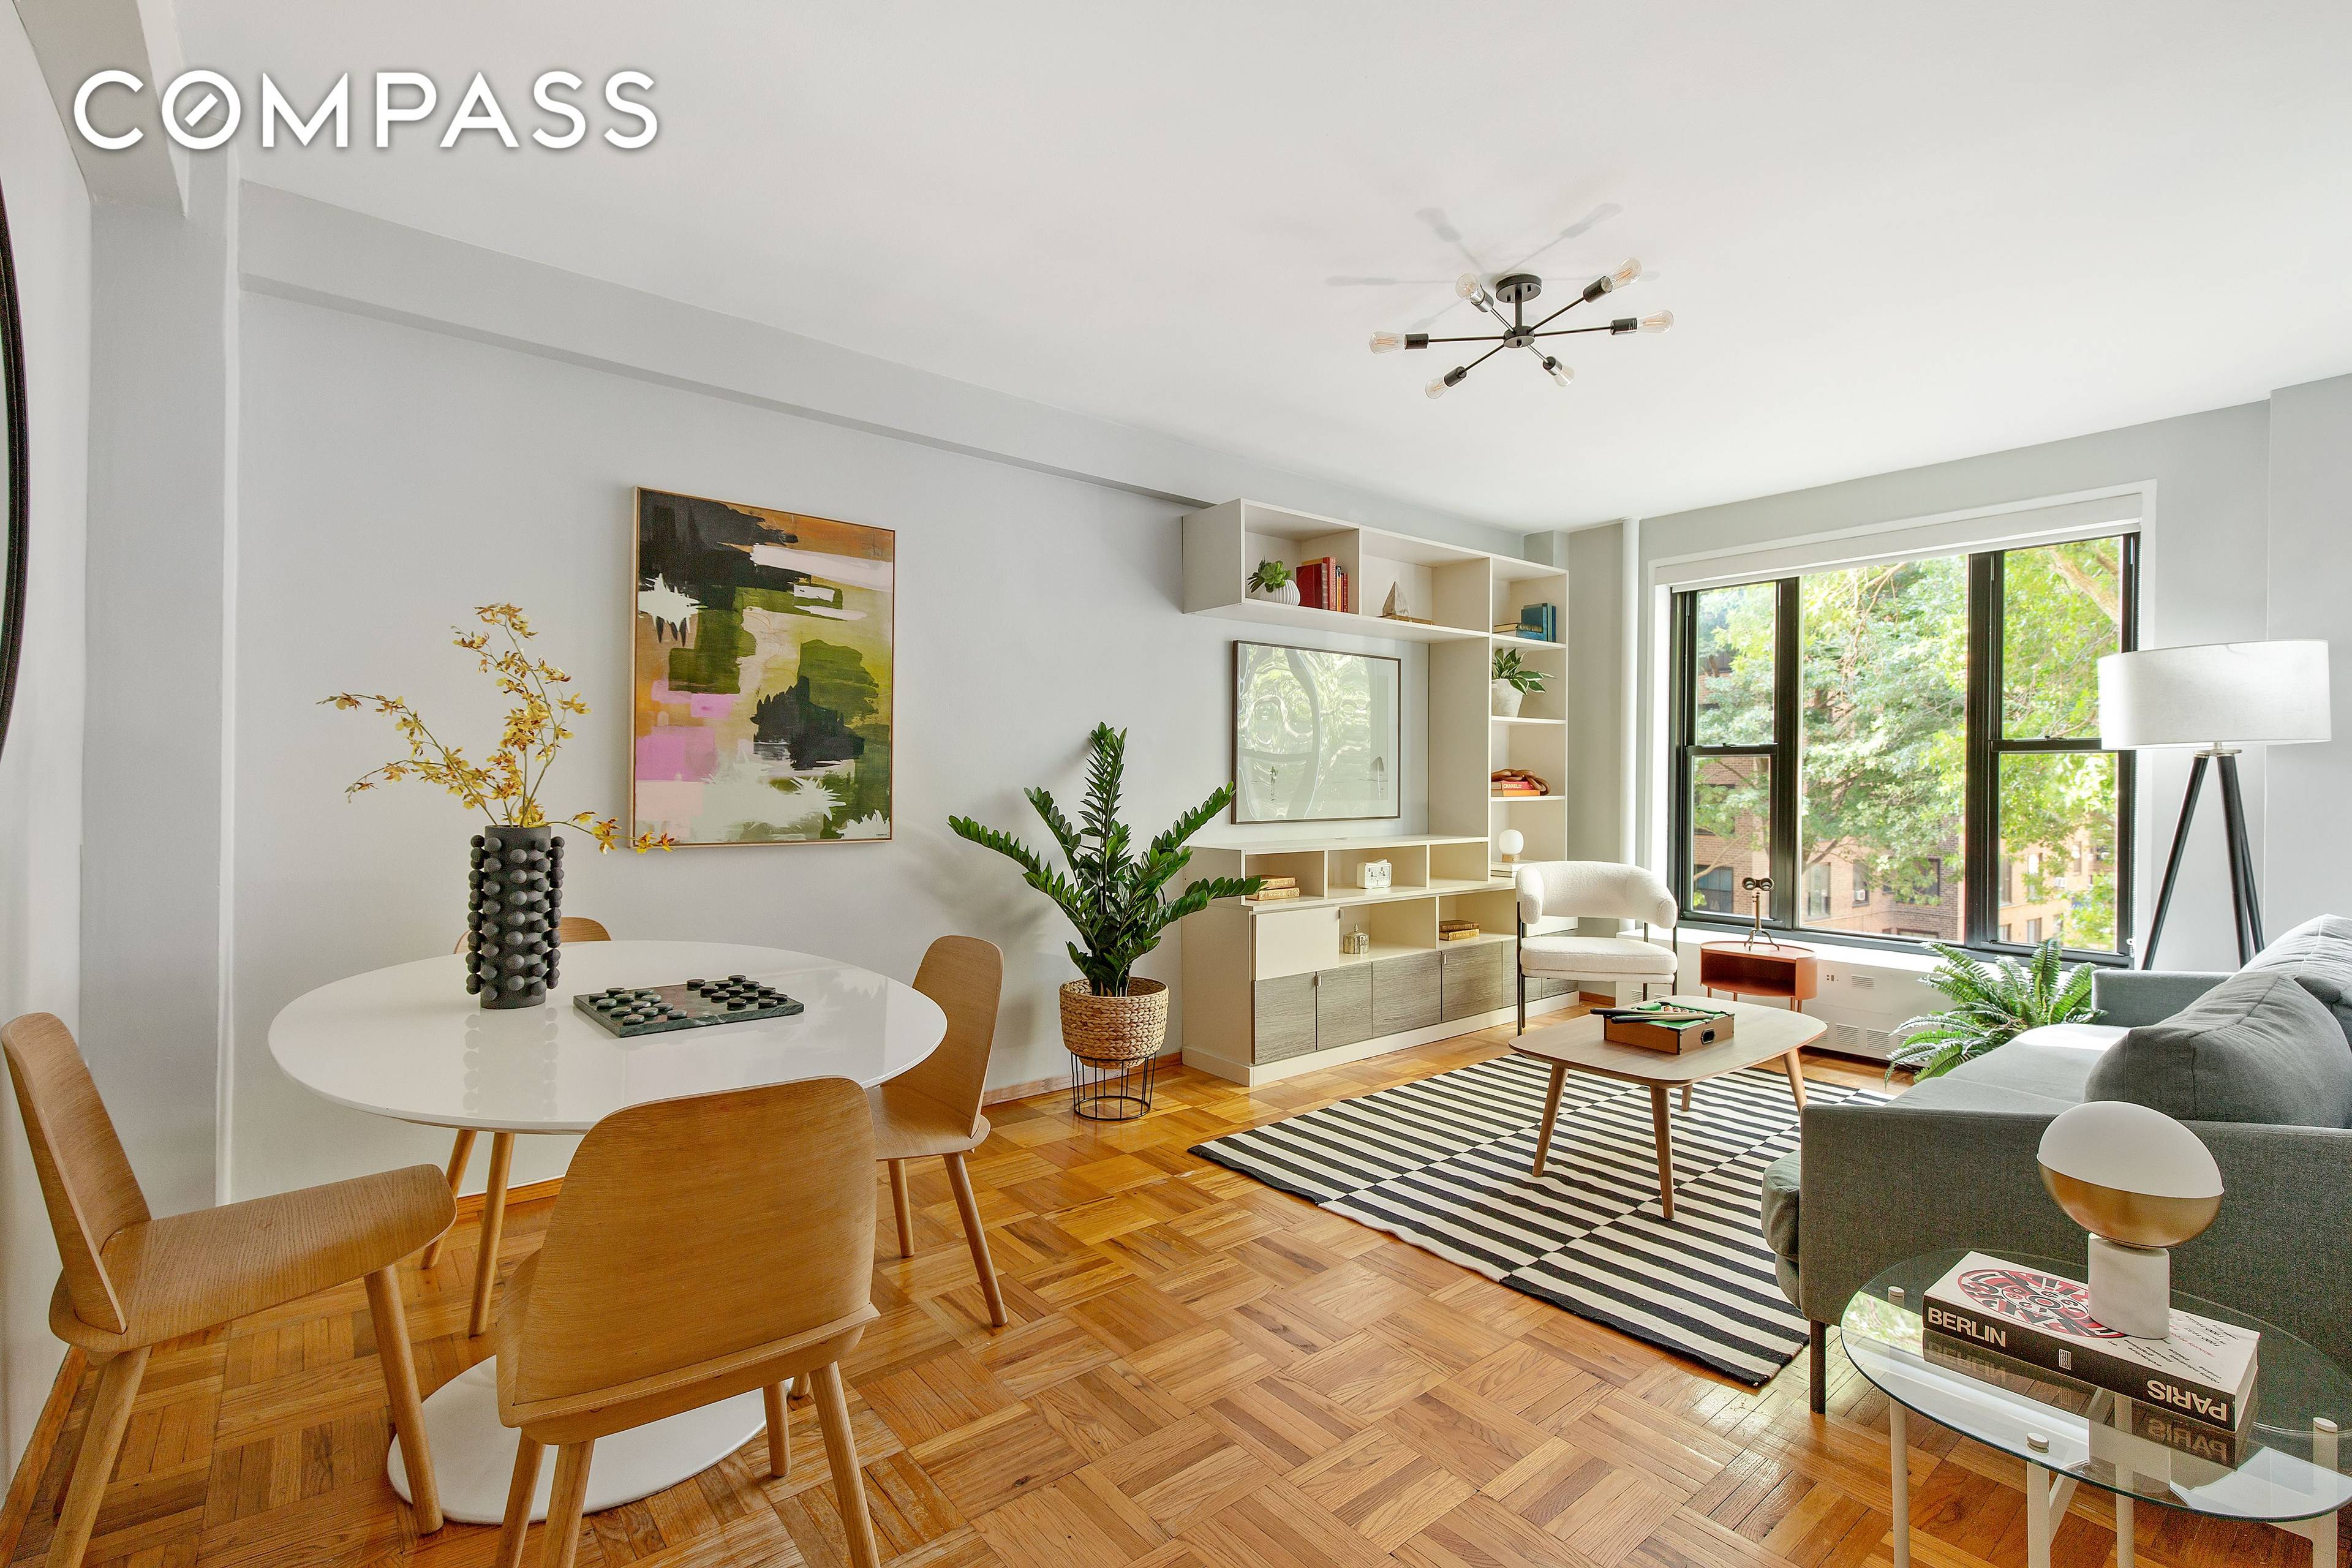 Beautifully renovated 2 bedroom home in the heart of Clinton Hill, Brooklyn.